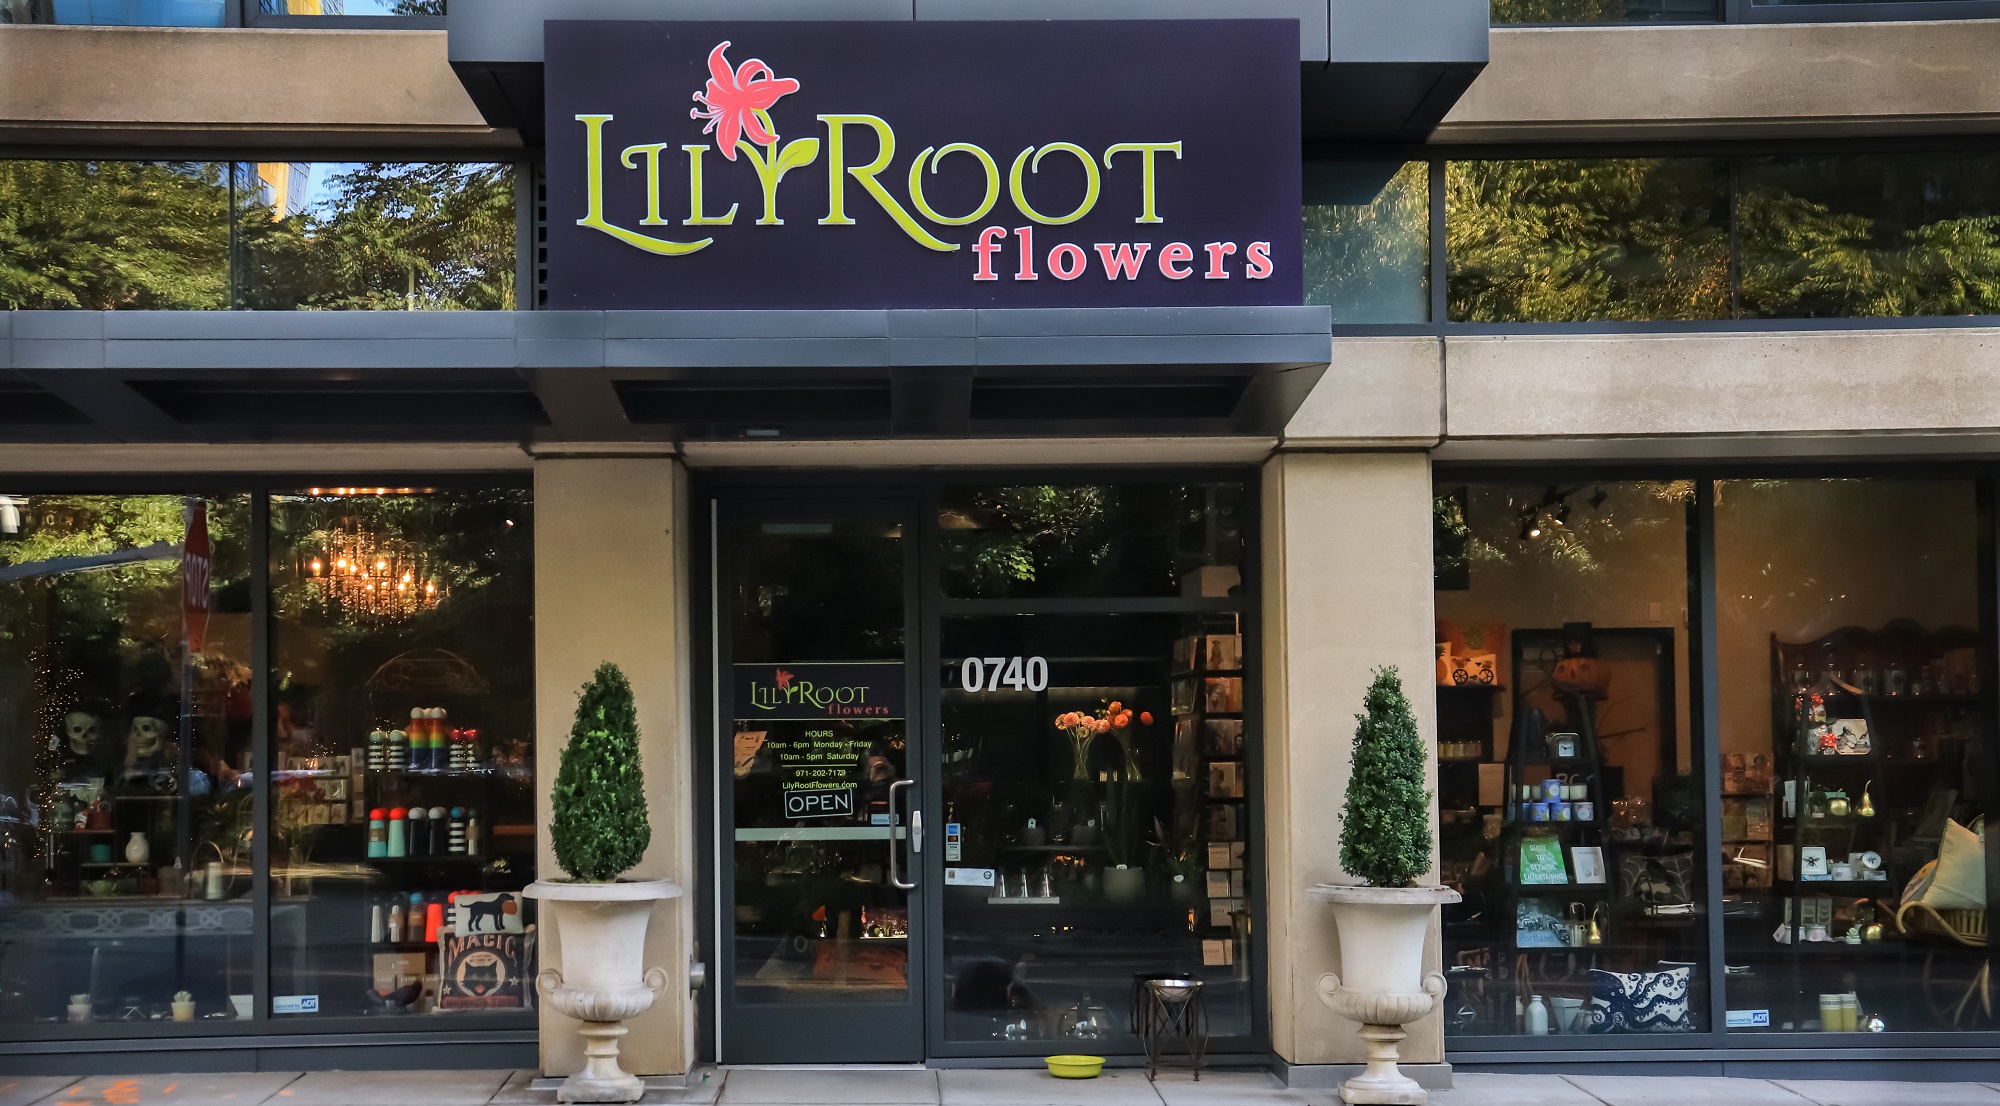 Liliroot Flowers storefront Portland OR